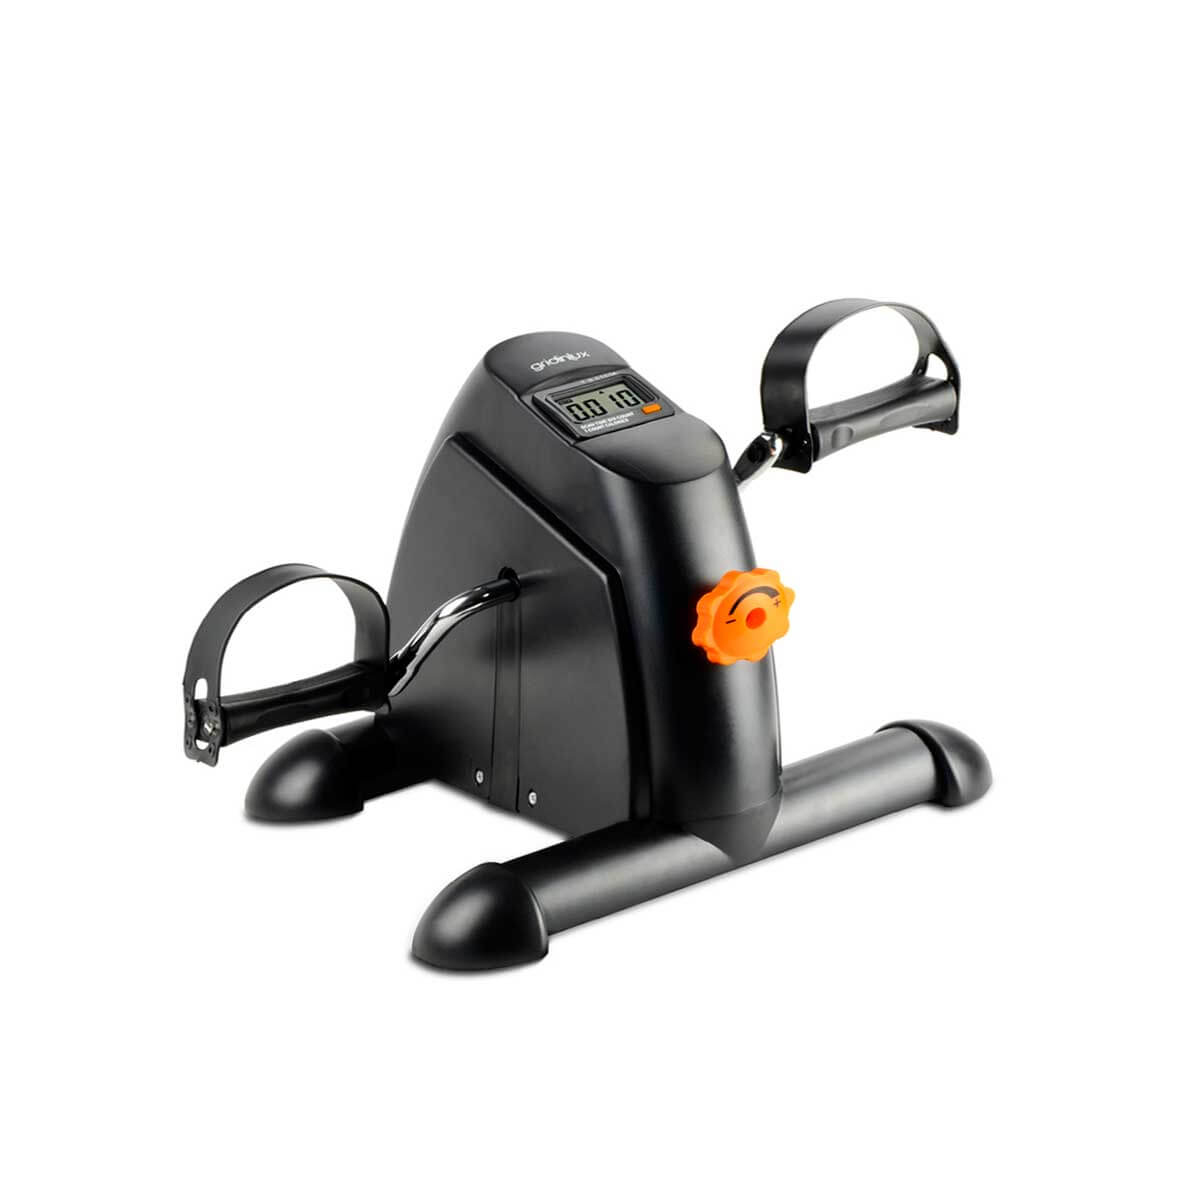 PEDAL TRAINER SMALL-FIT 1000.